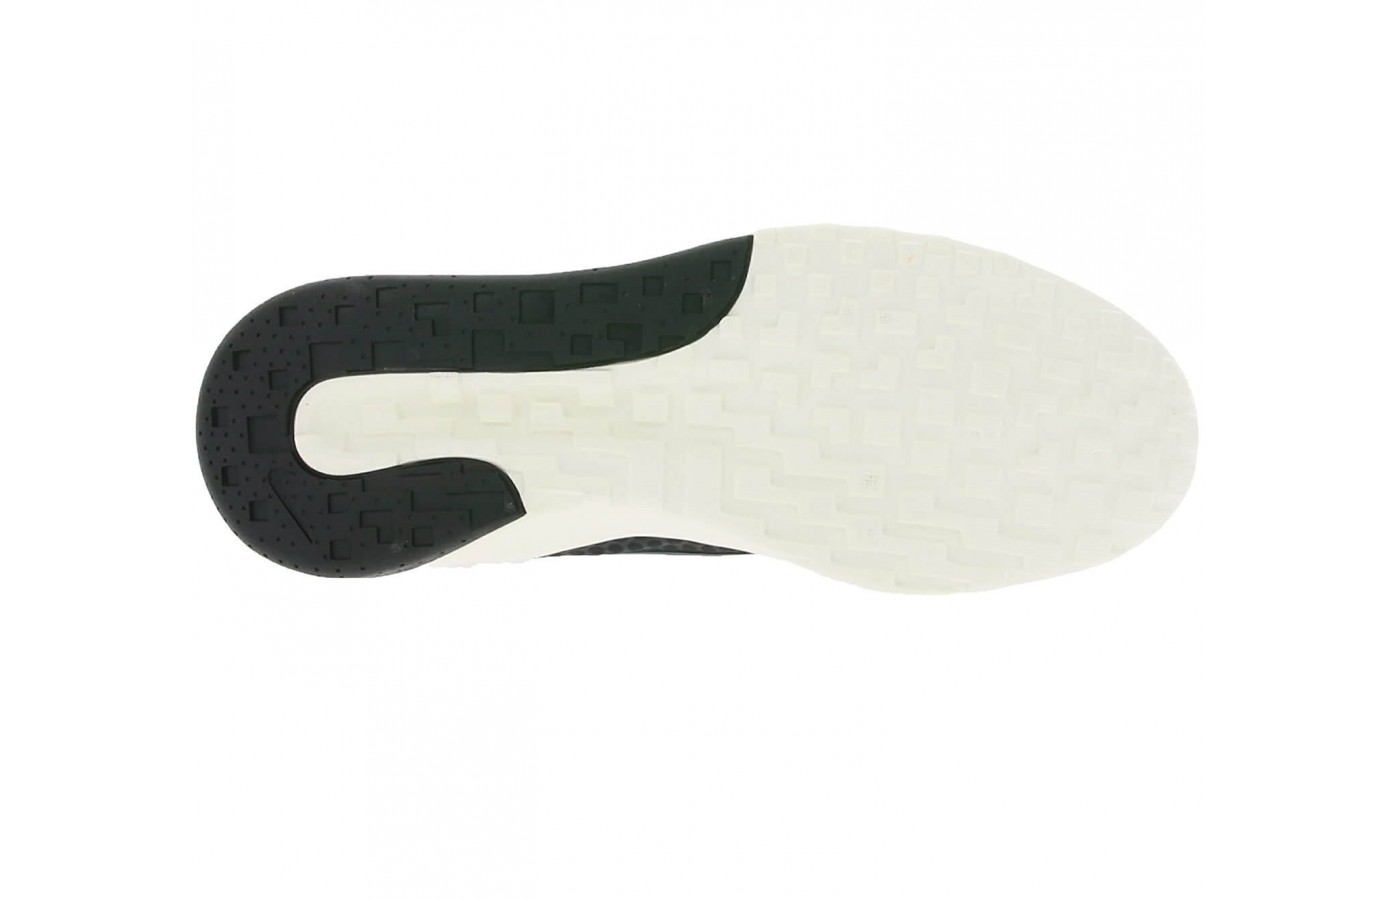 The outsole of the Nike CK Racer is similar in design to a trail runner and provides similar traction.